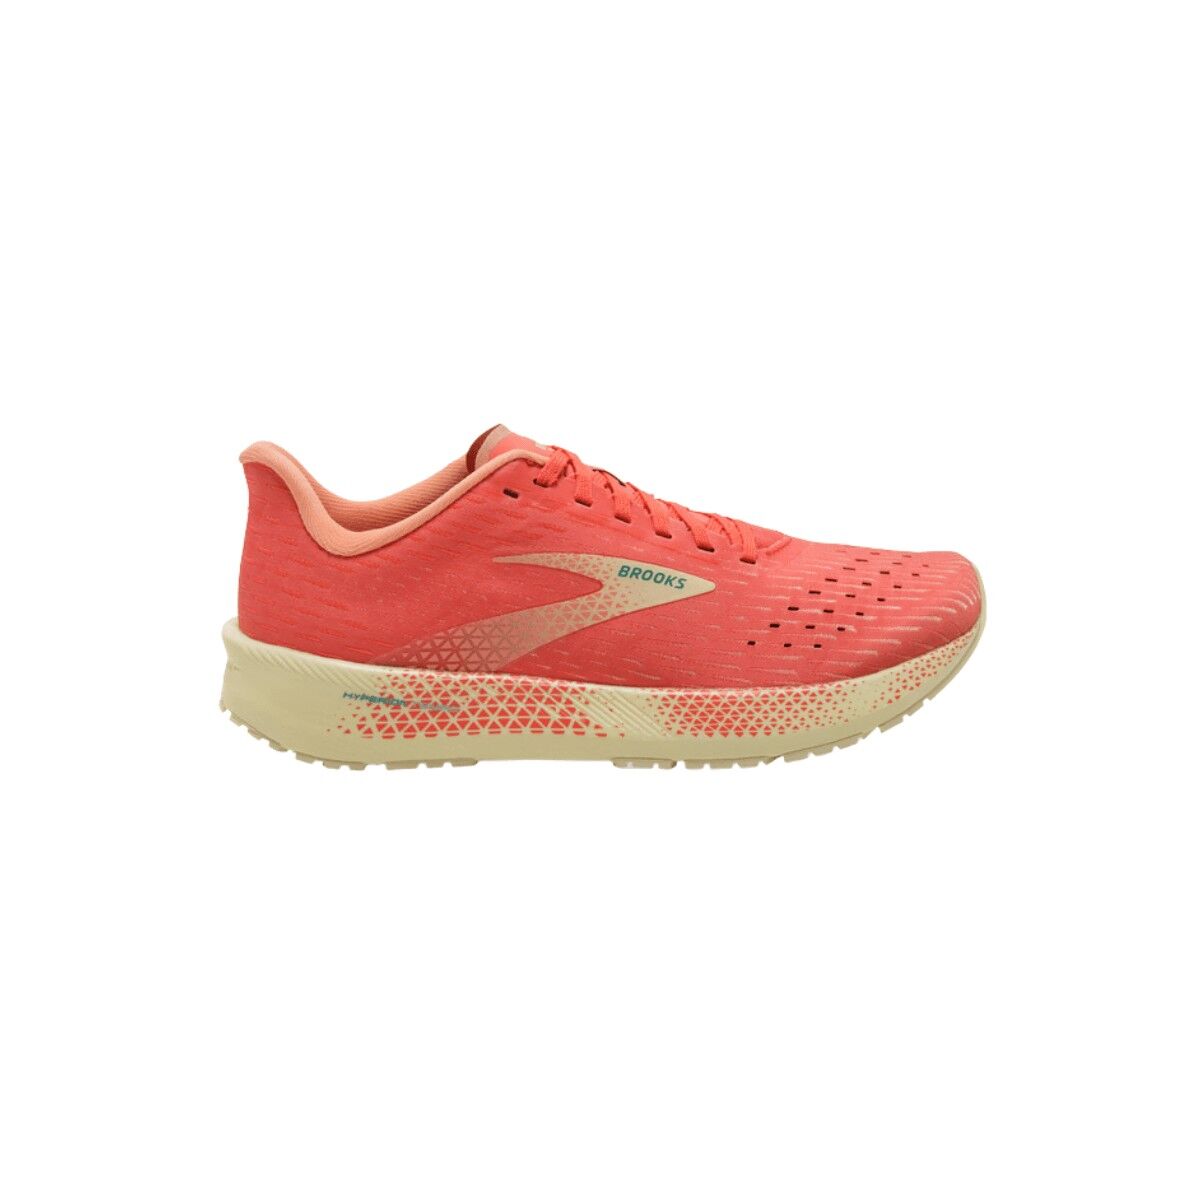 Chaussures Brooks Hyperion Tempo Orange Coral Yellow Femmes, Taille 36,5 - EUR